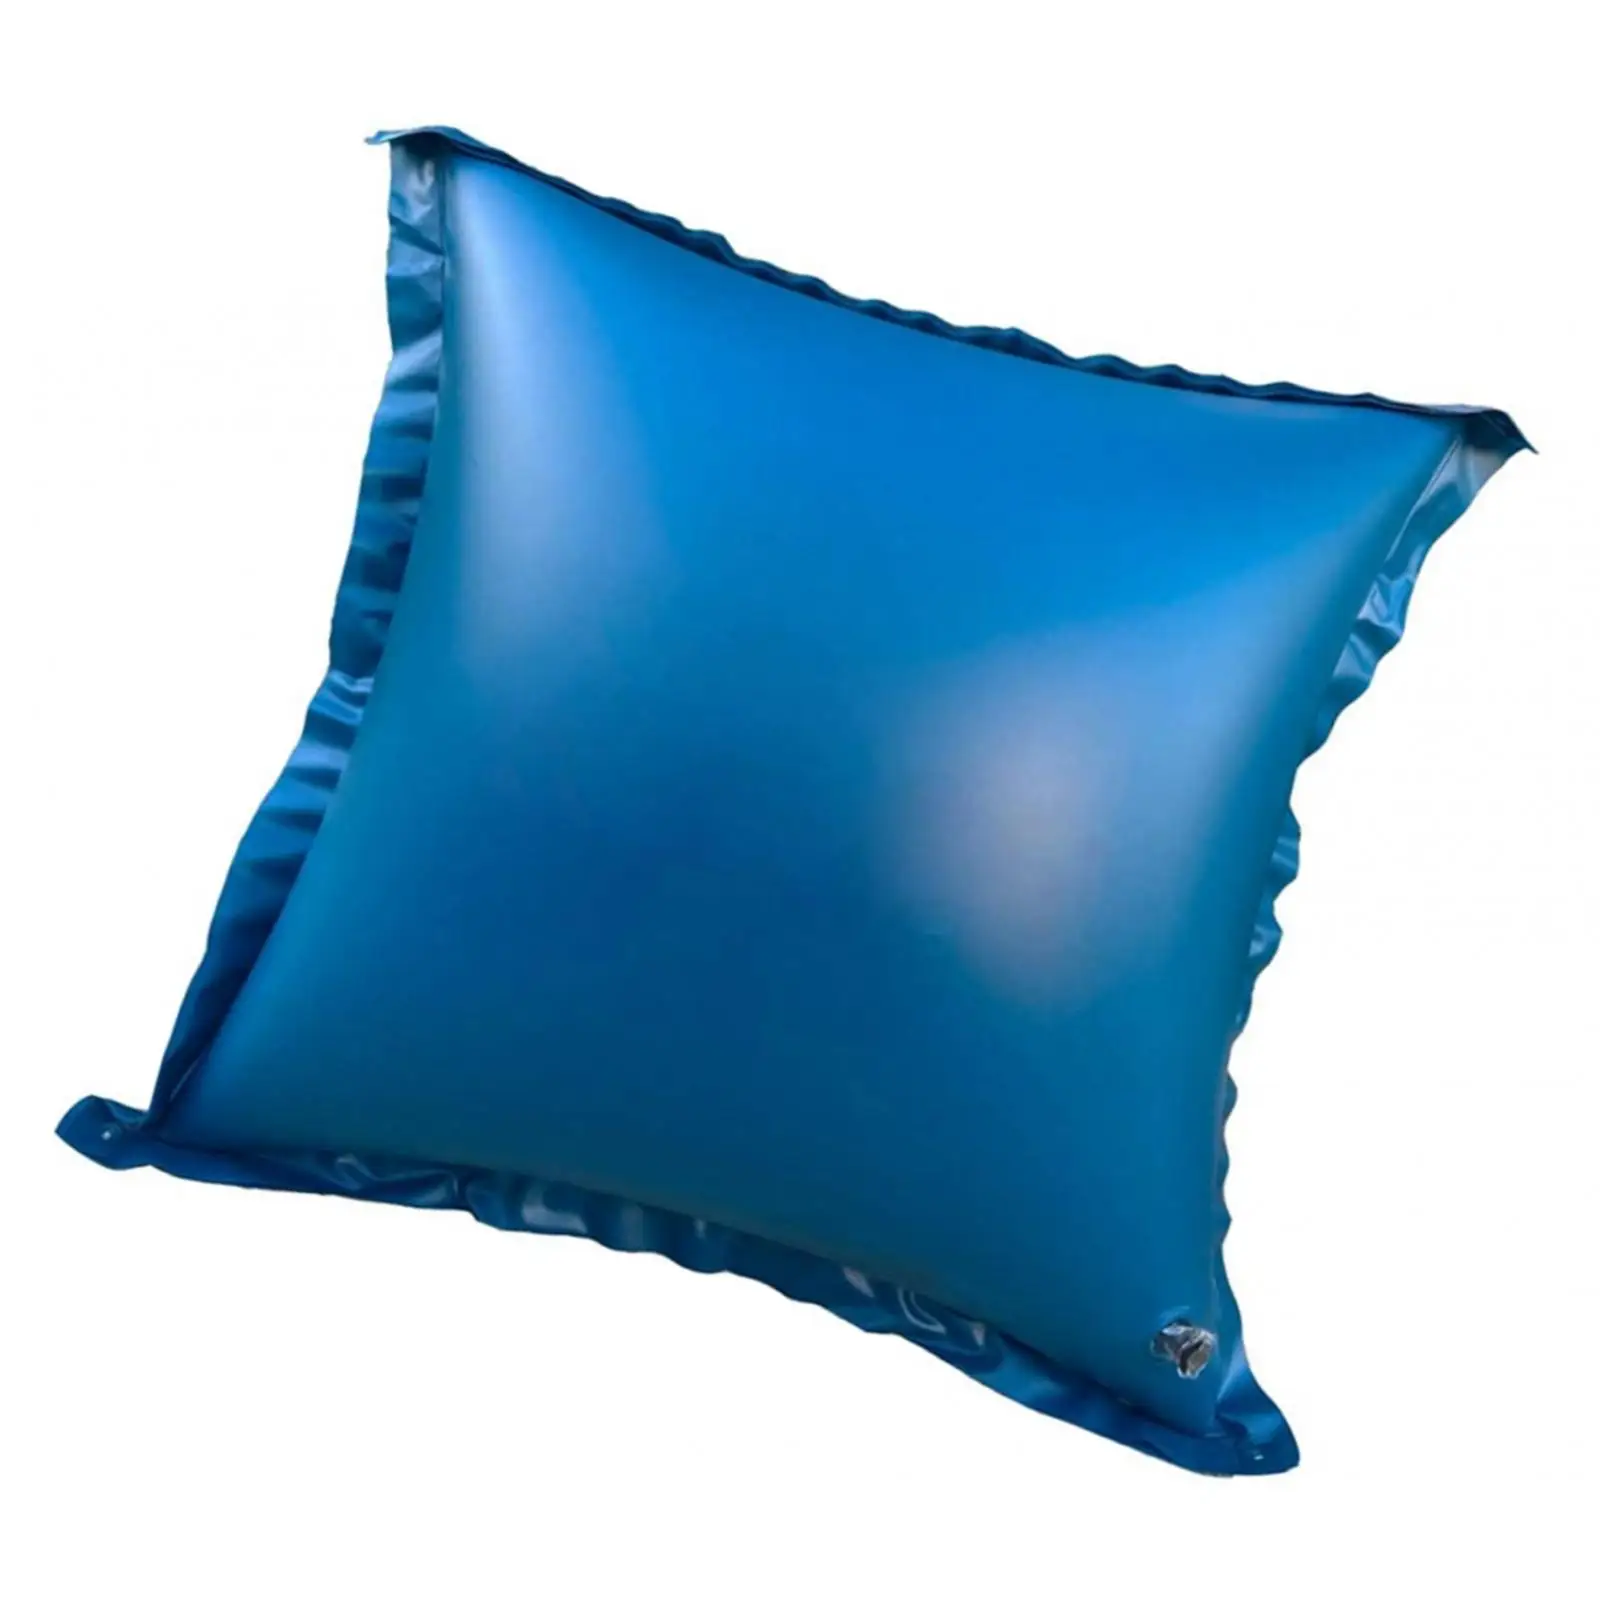 Winterizing Pool Pillow Closing Kit Floating Protector Durable Multifunction Inflatable Air Pillows for Outdoor Swimming Pool